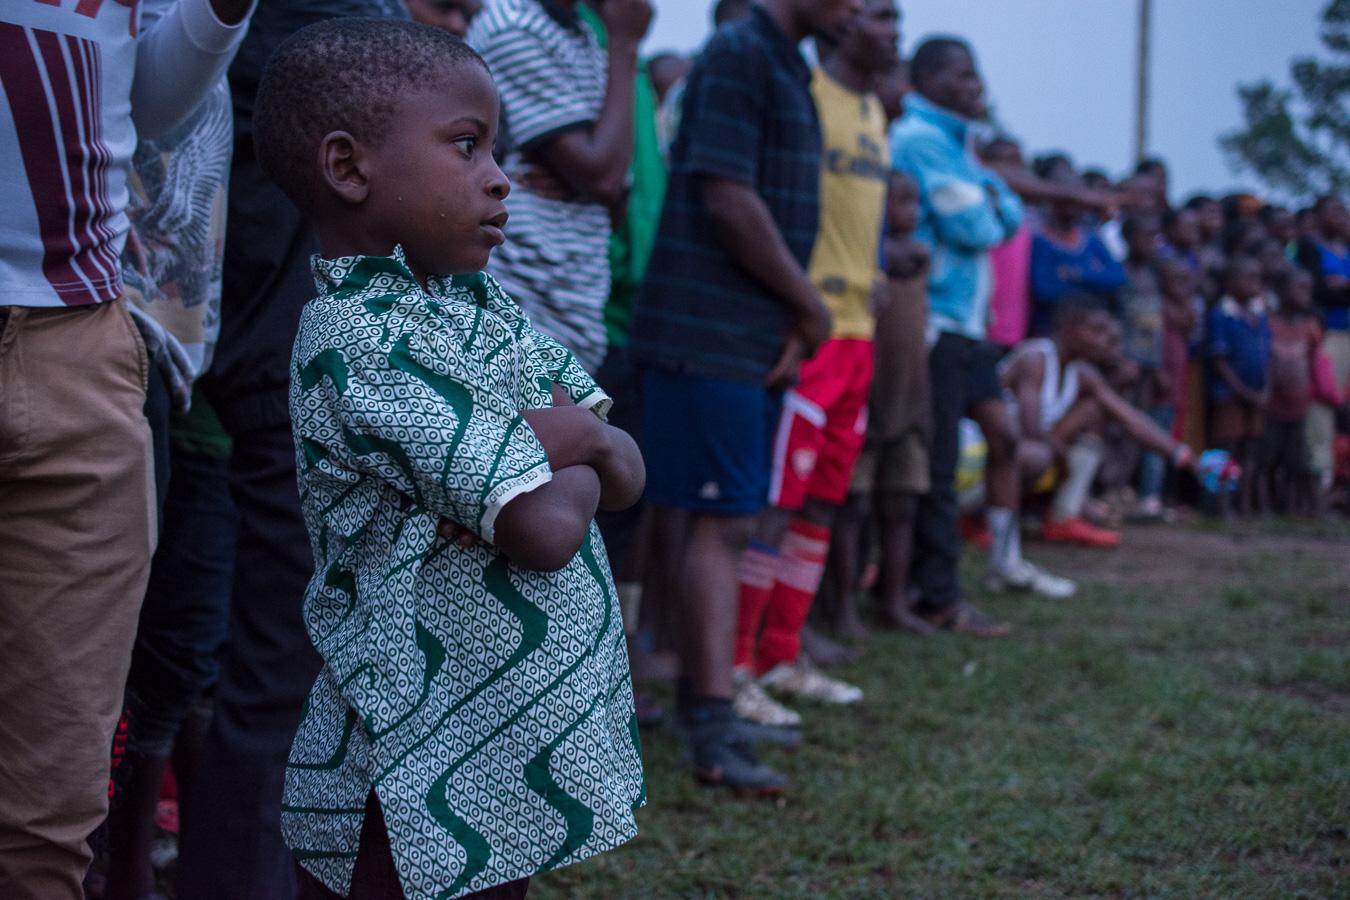 The Politics of a Scientific Campaign ( DSLR Camera Version) - A young soccer fan looks on during the soccer match.